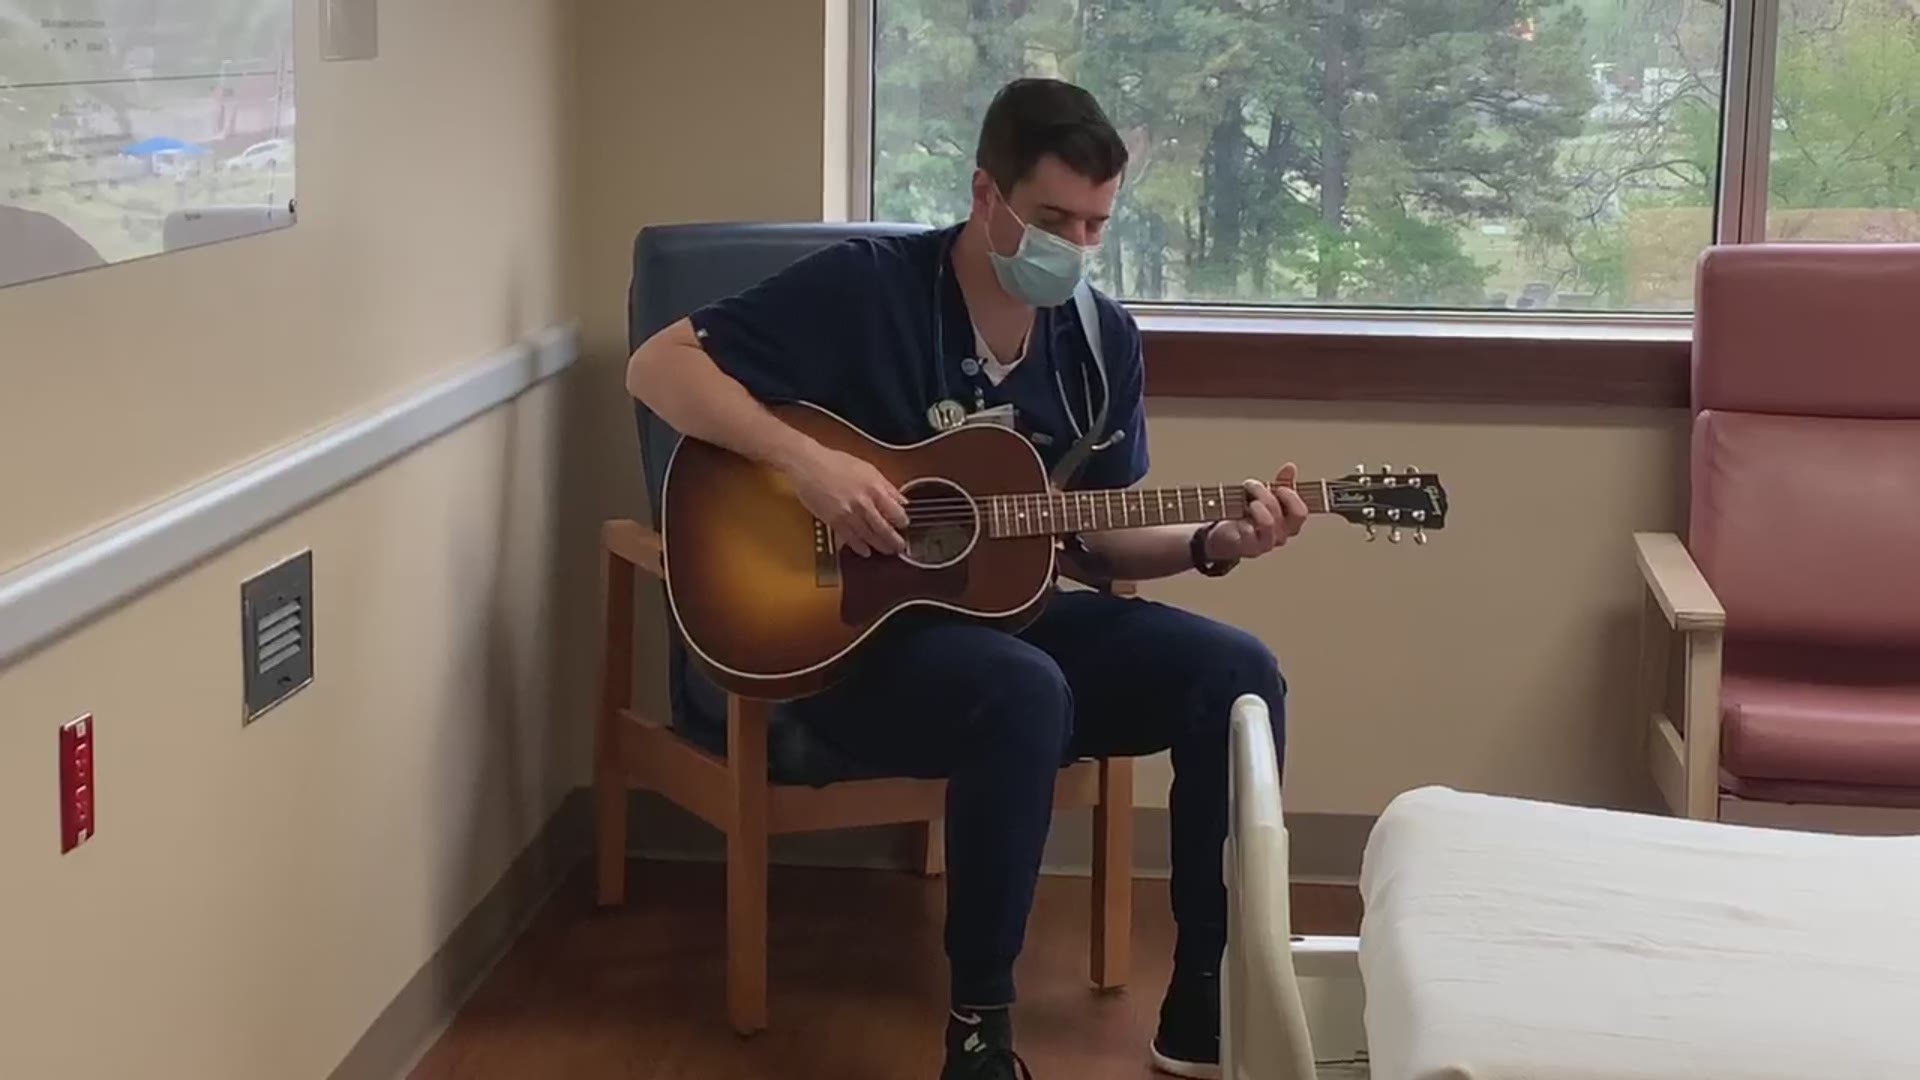 Nurse Mike Stramiello decided to pull out his guitar and sing a few tunes when things felt tense in the hospital. Everyone loved it!